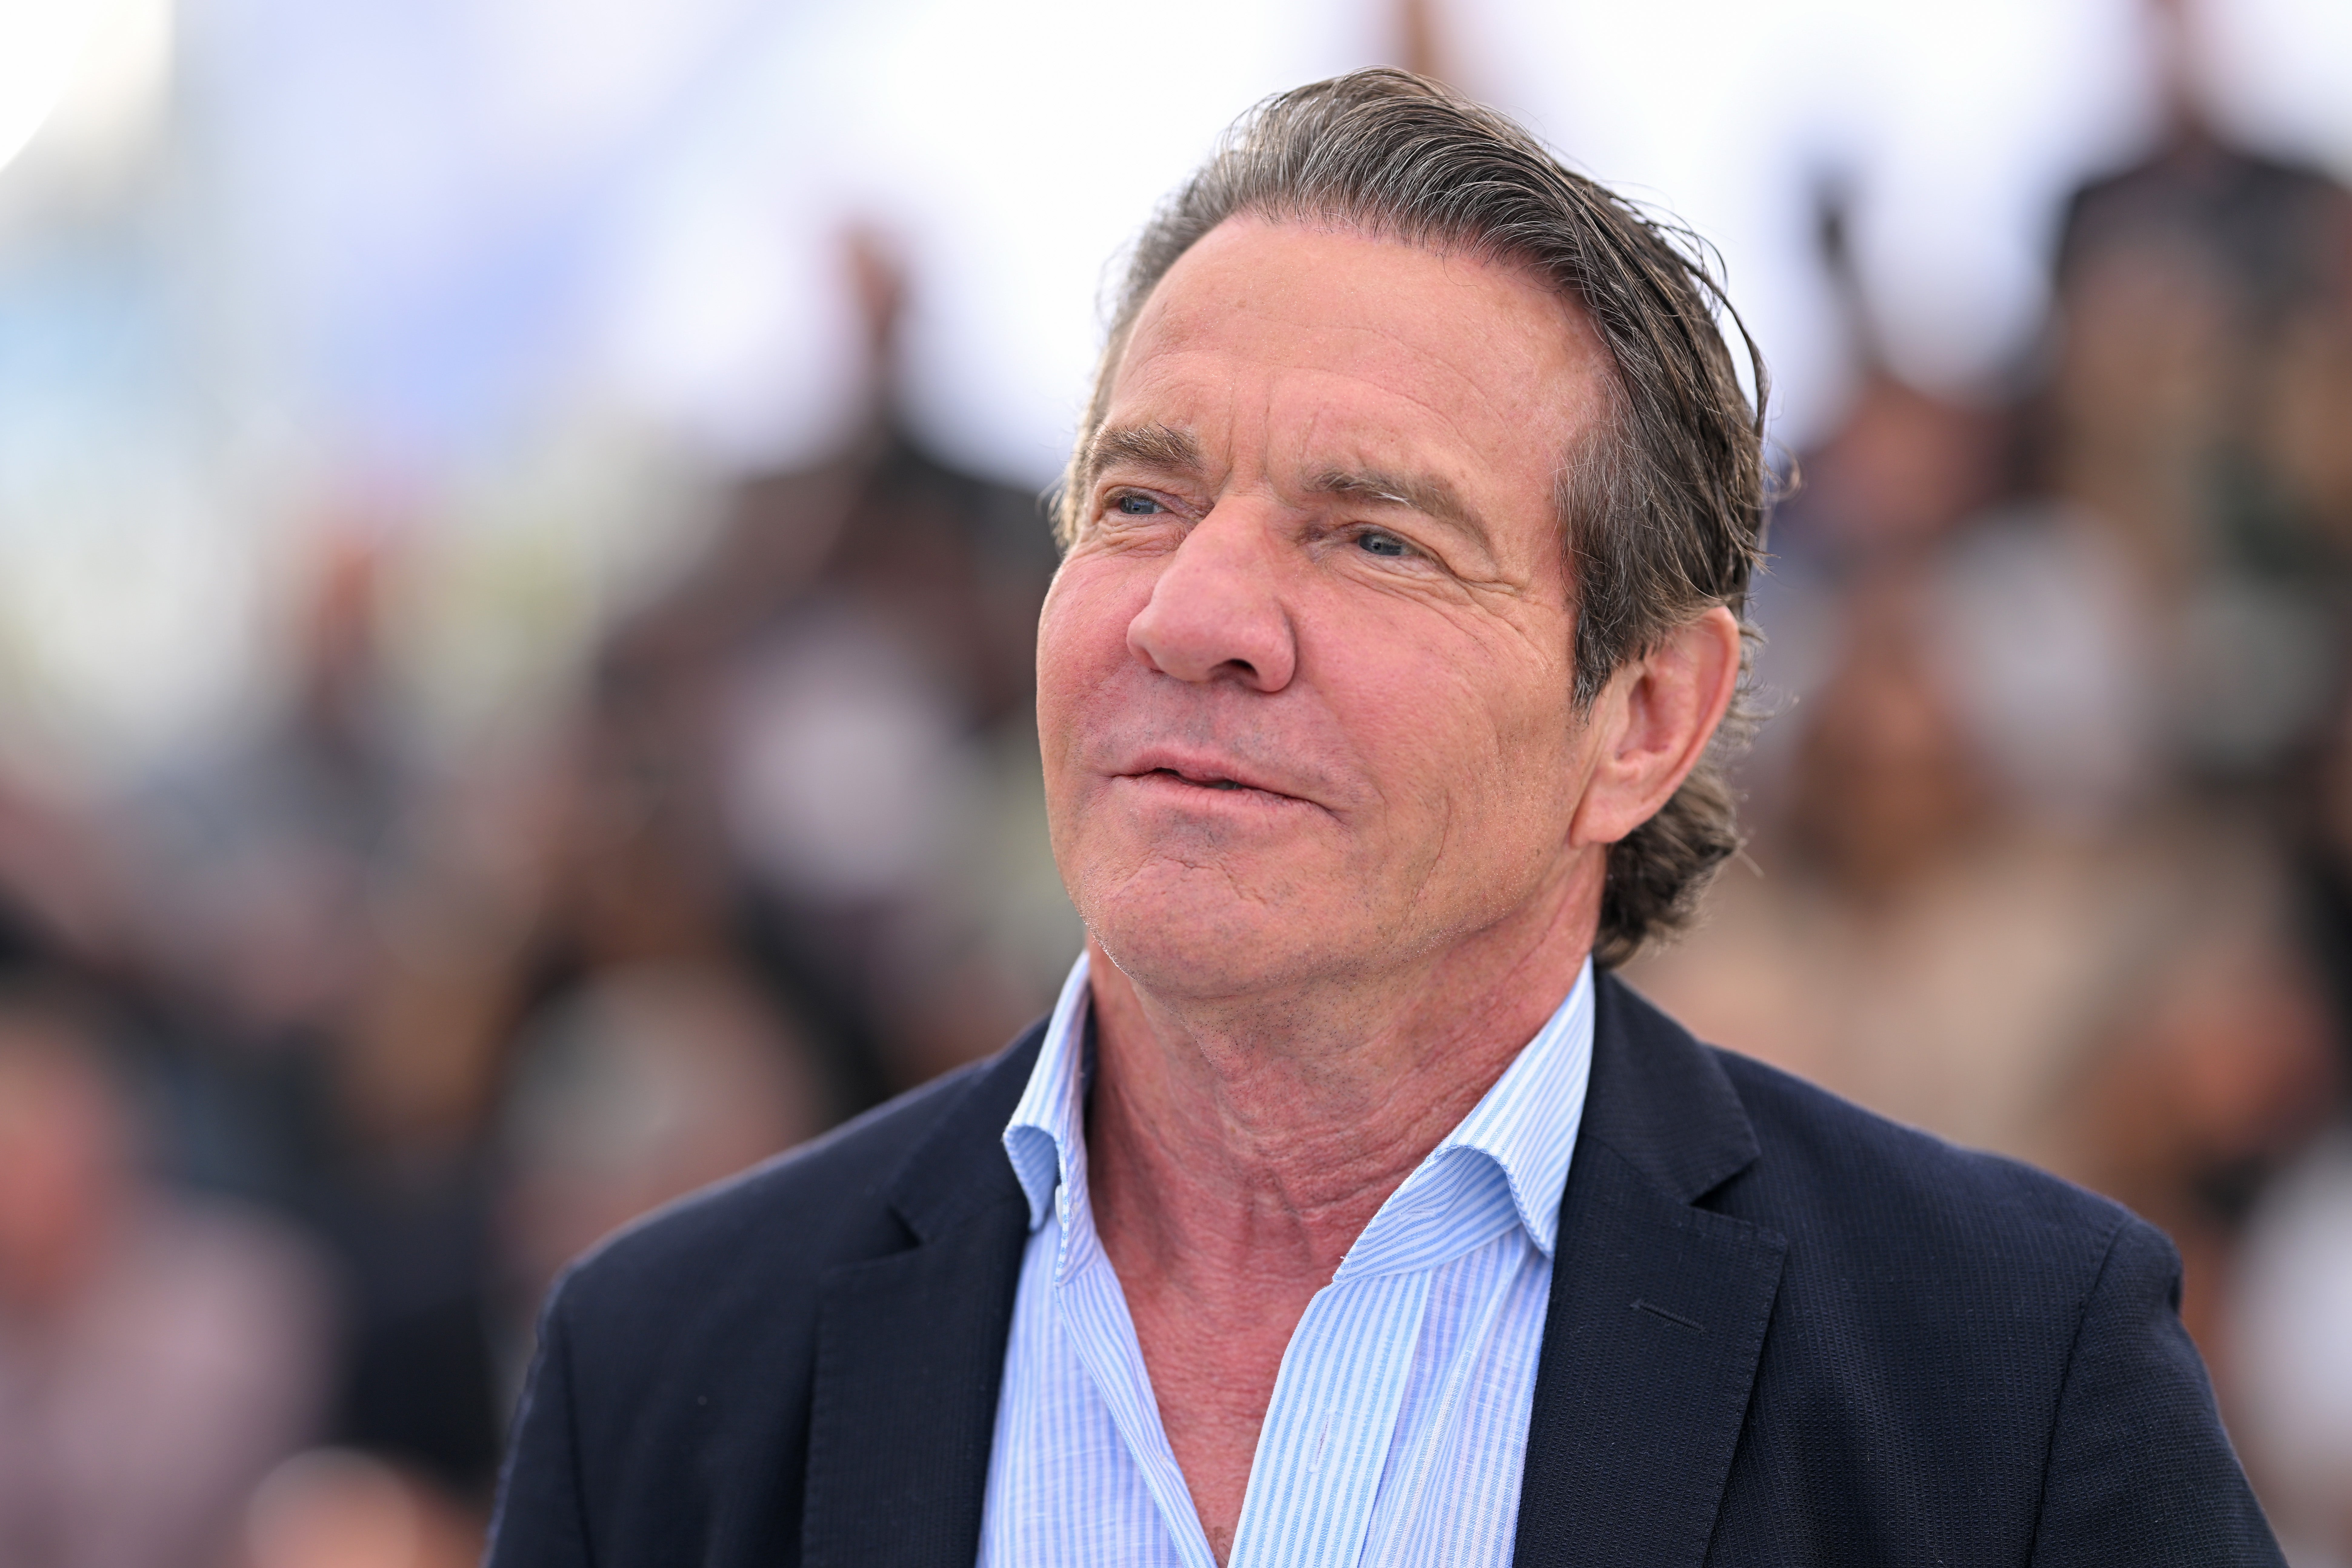 Dennis Quaid has revealed he will vote for Donald Trump in the upcoming United States presidential election